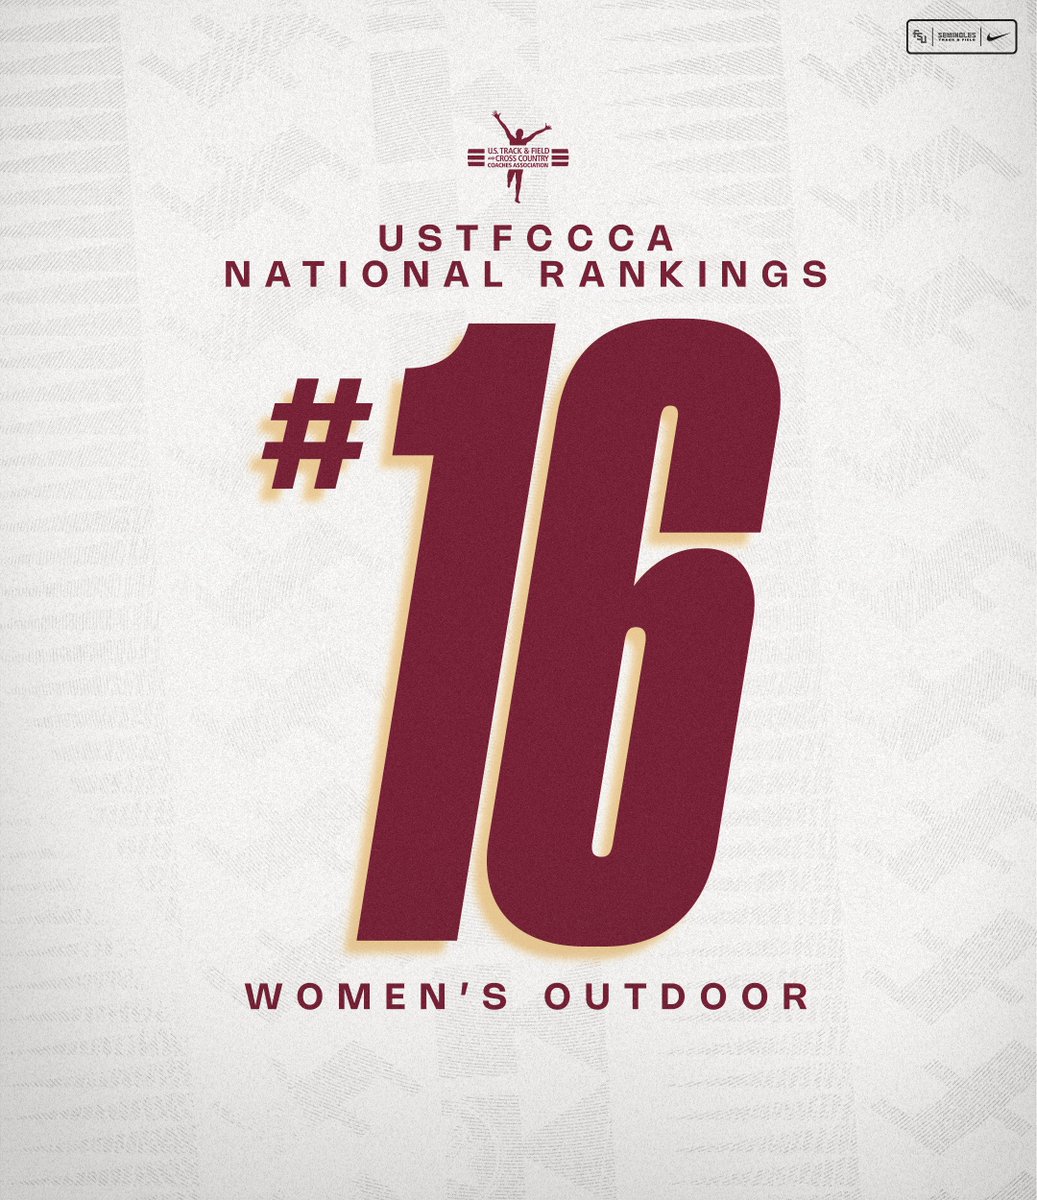 𝐓𝐡𝐫𝐞𝐞 𝐜𝐨𝐧𝐬𝐞𝐜𝐮𝐭𝐢𝐯𝐞 𝐰𝐞𝐞𝐤𝐬 𝐢𝐧 𝐭𝐡𝐞 𝐫𝐚𝐧𝐤𝐢𝐧𝐠𝐬 📈.   

Our women's outdoor program moves up to #16 in this week's @USTFCCCA national rankings.  

 #NoleFamily | #OneTribe